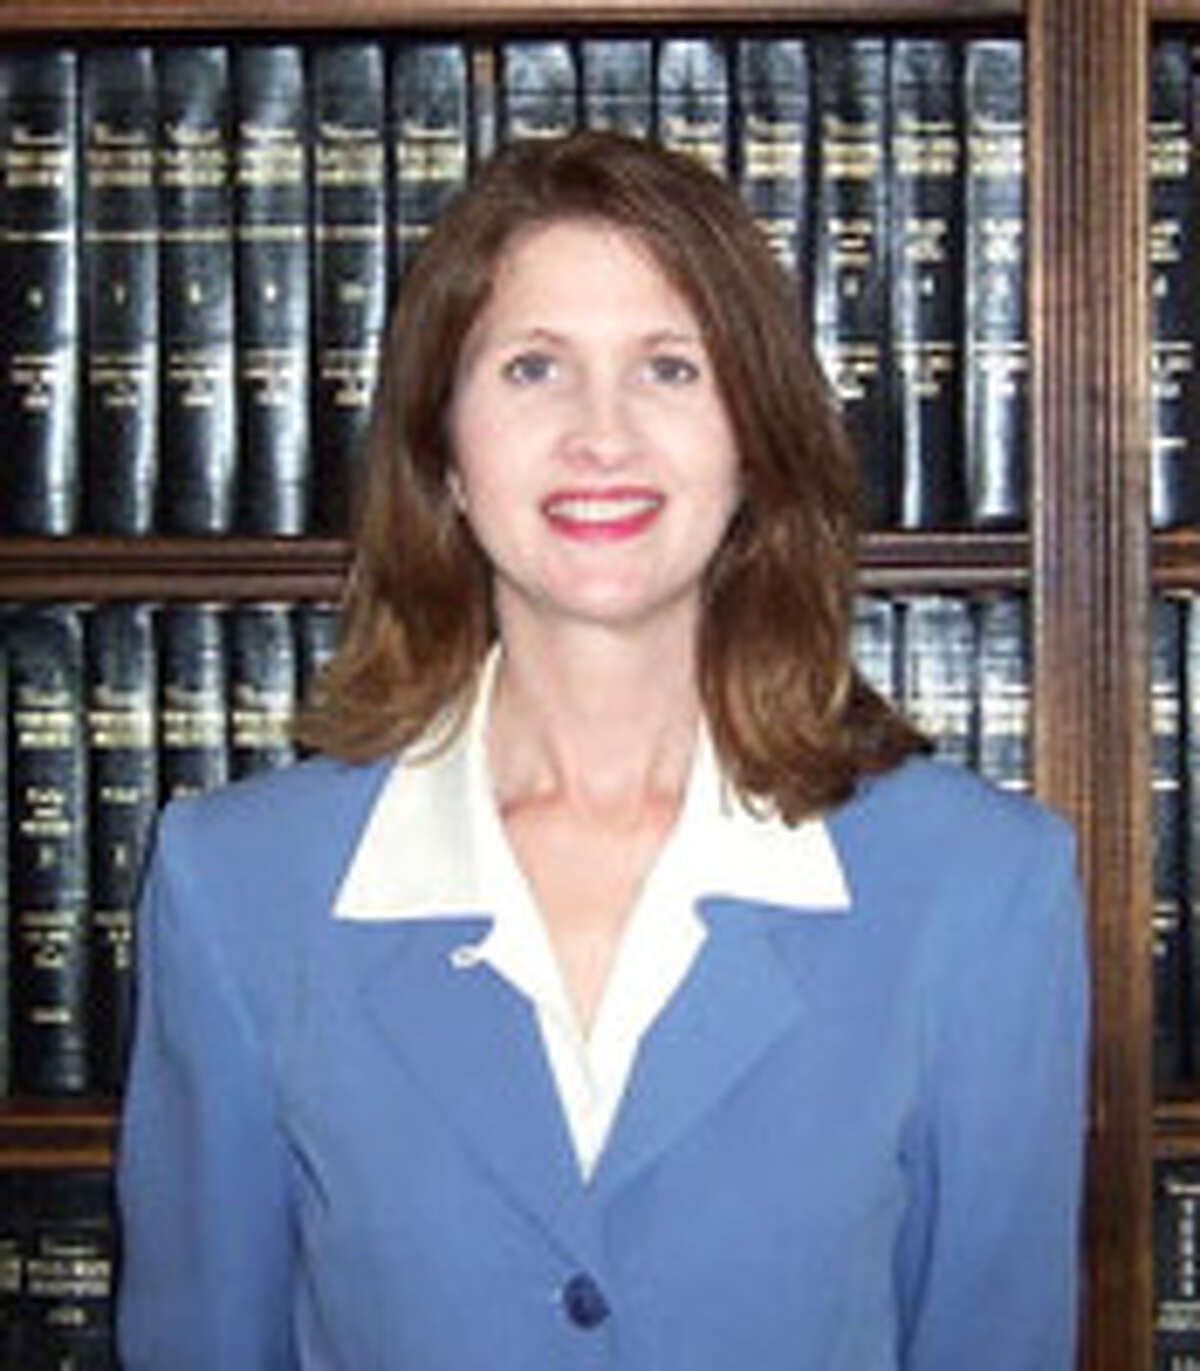 Judge Elizabeth E. Coker oversees the 258th district court that covers Polk, San Jacinto and Trinity counties. Coker is accused of the "very unethical" practice of sending text messages from the bench to an assistant district attorney to help bolster the prosecution's case during a trial, according to an investigator's report. Credit: Trinity County